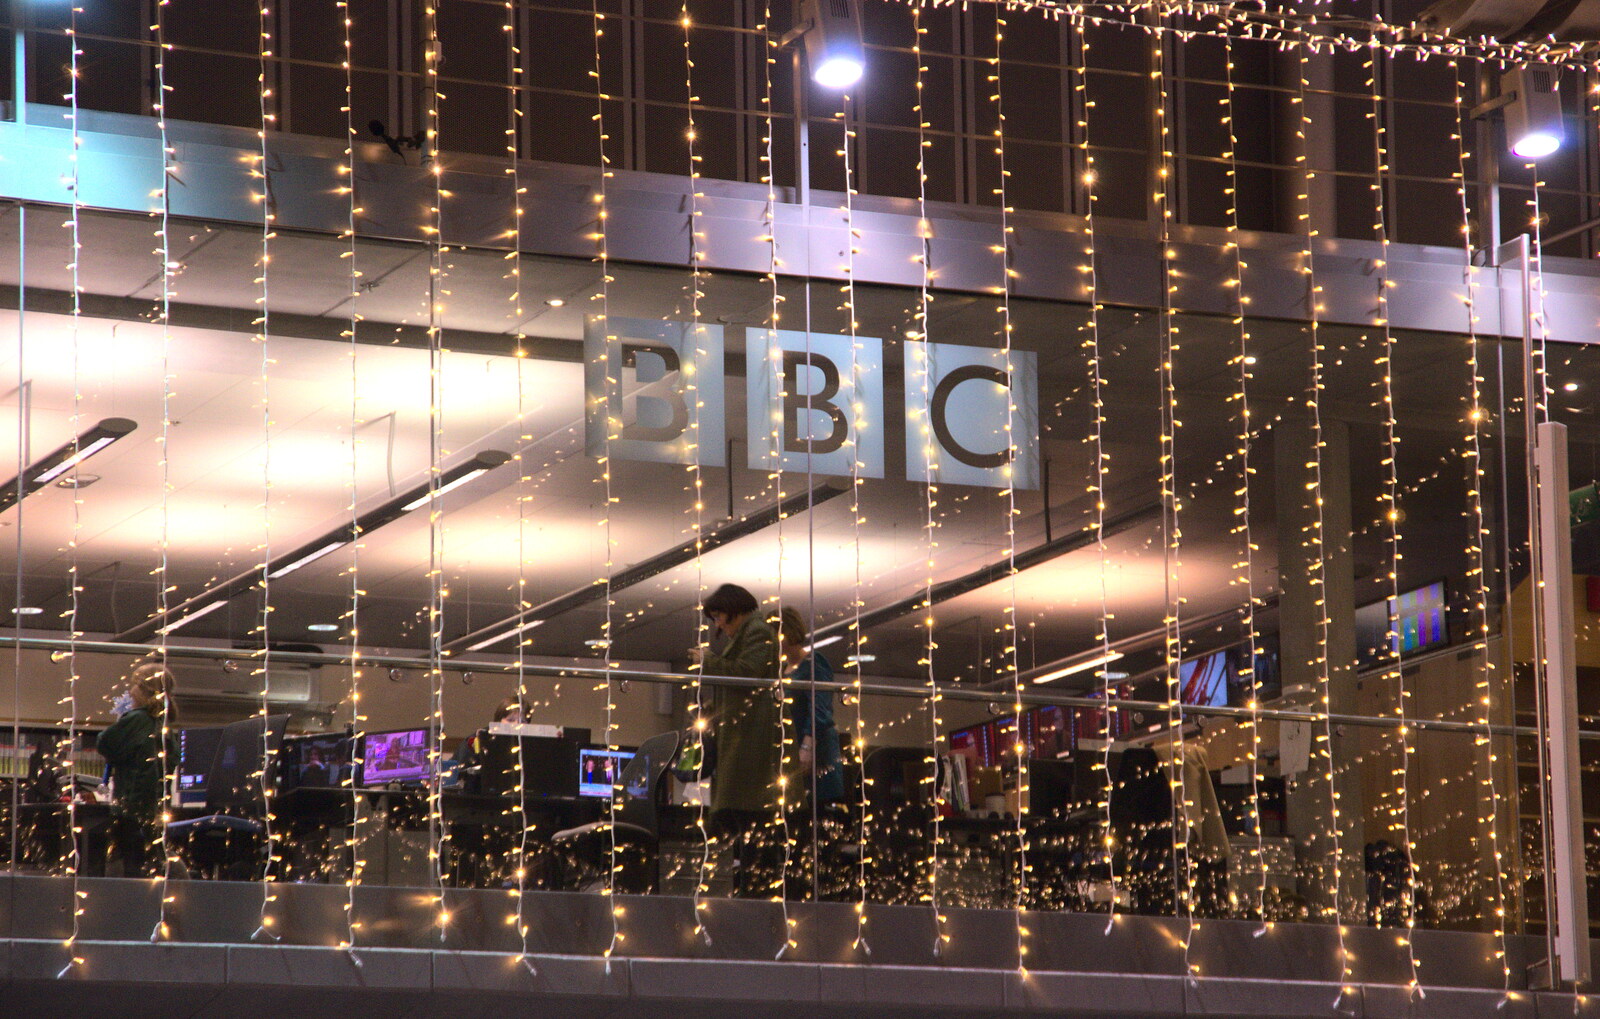 Sparkly lights on the BBC studio from Norwich Lights and Isobel Sings, Norwich, Norfolk - 15th November 2018